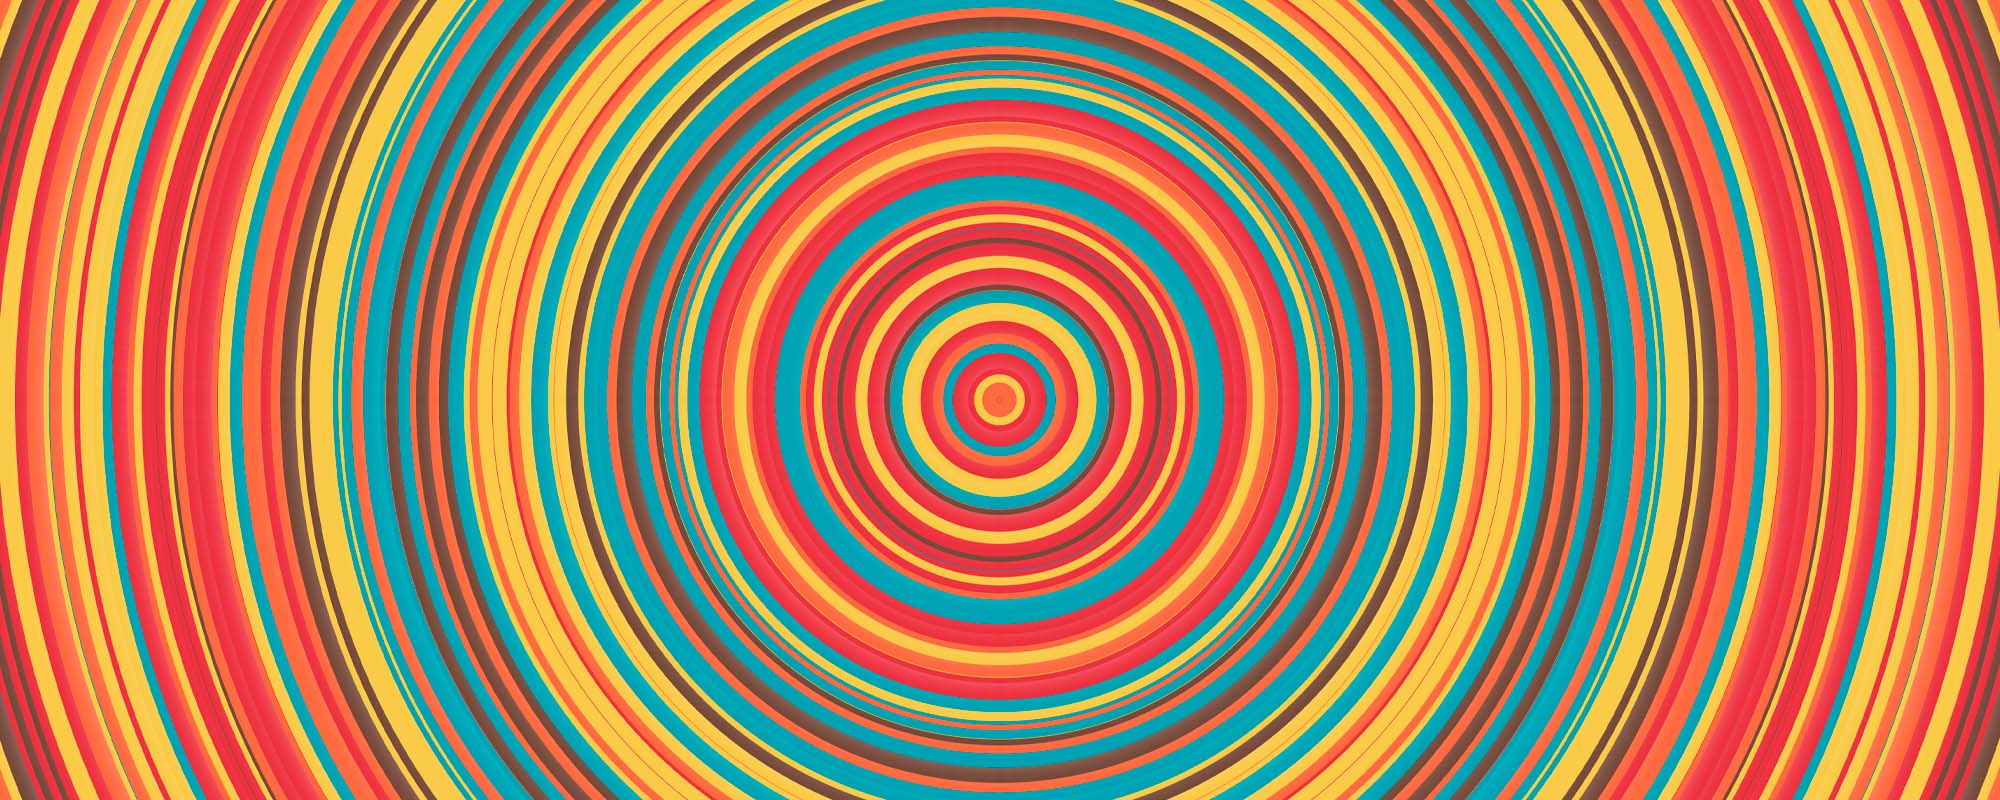 A unique 1/1 generative art created from the name of the 9th President William Henry Harrison. Character code values in the name were used to modulate circular bands along with unique generative algorithm to create this unique and beautiful art piece.